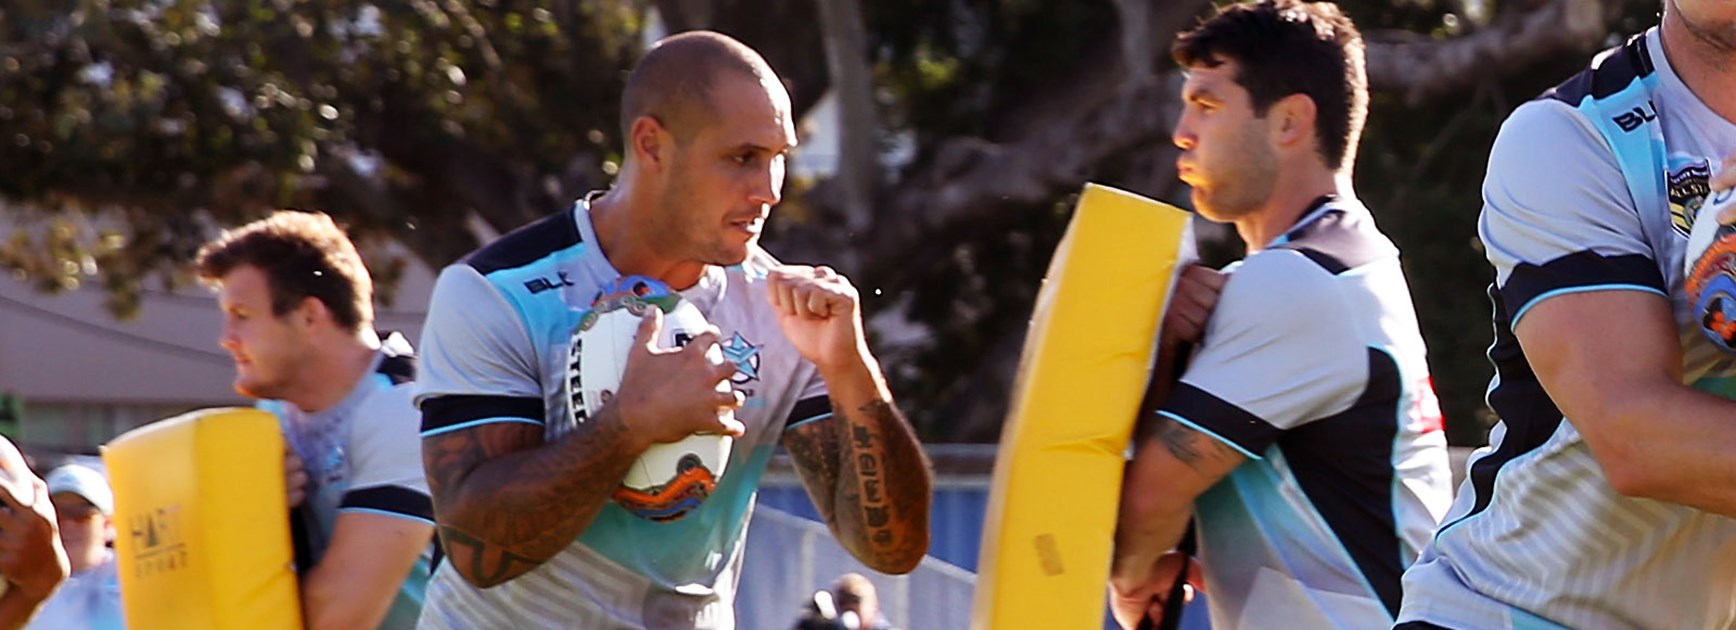 World All Stars teammates Jeremy Smith and Michael Ennis at training this week.